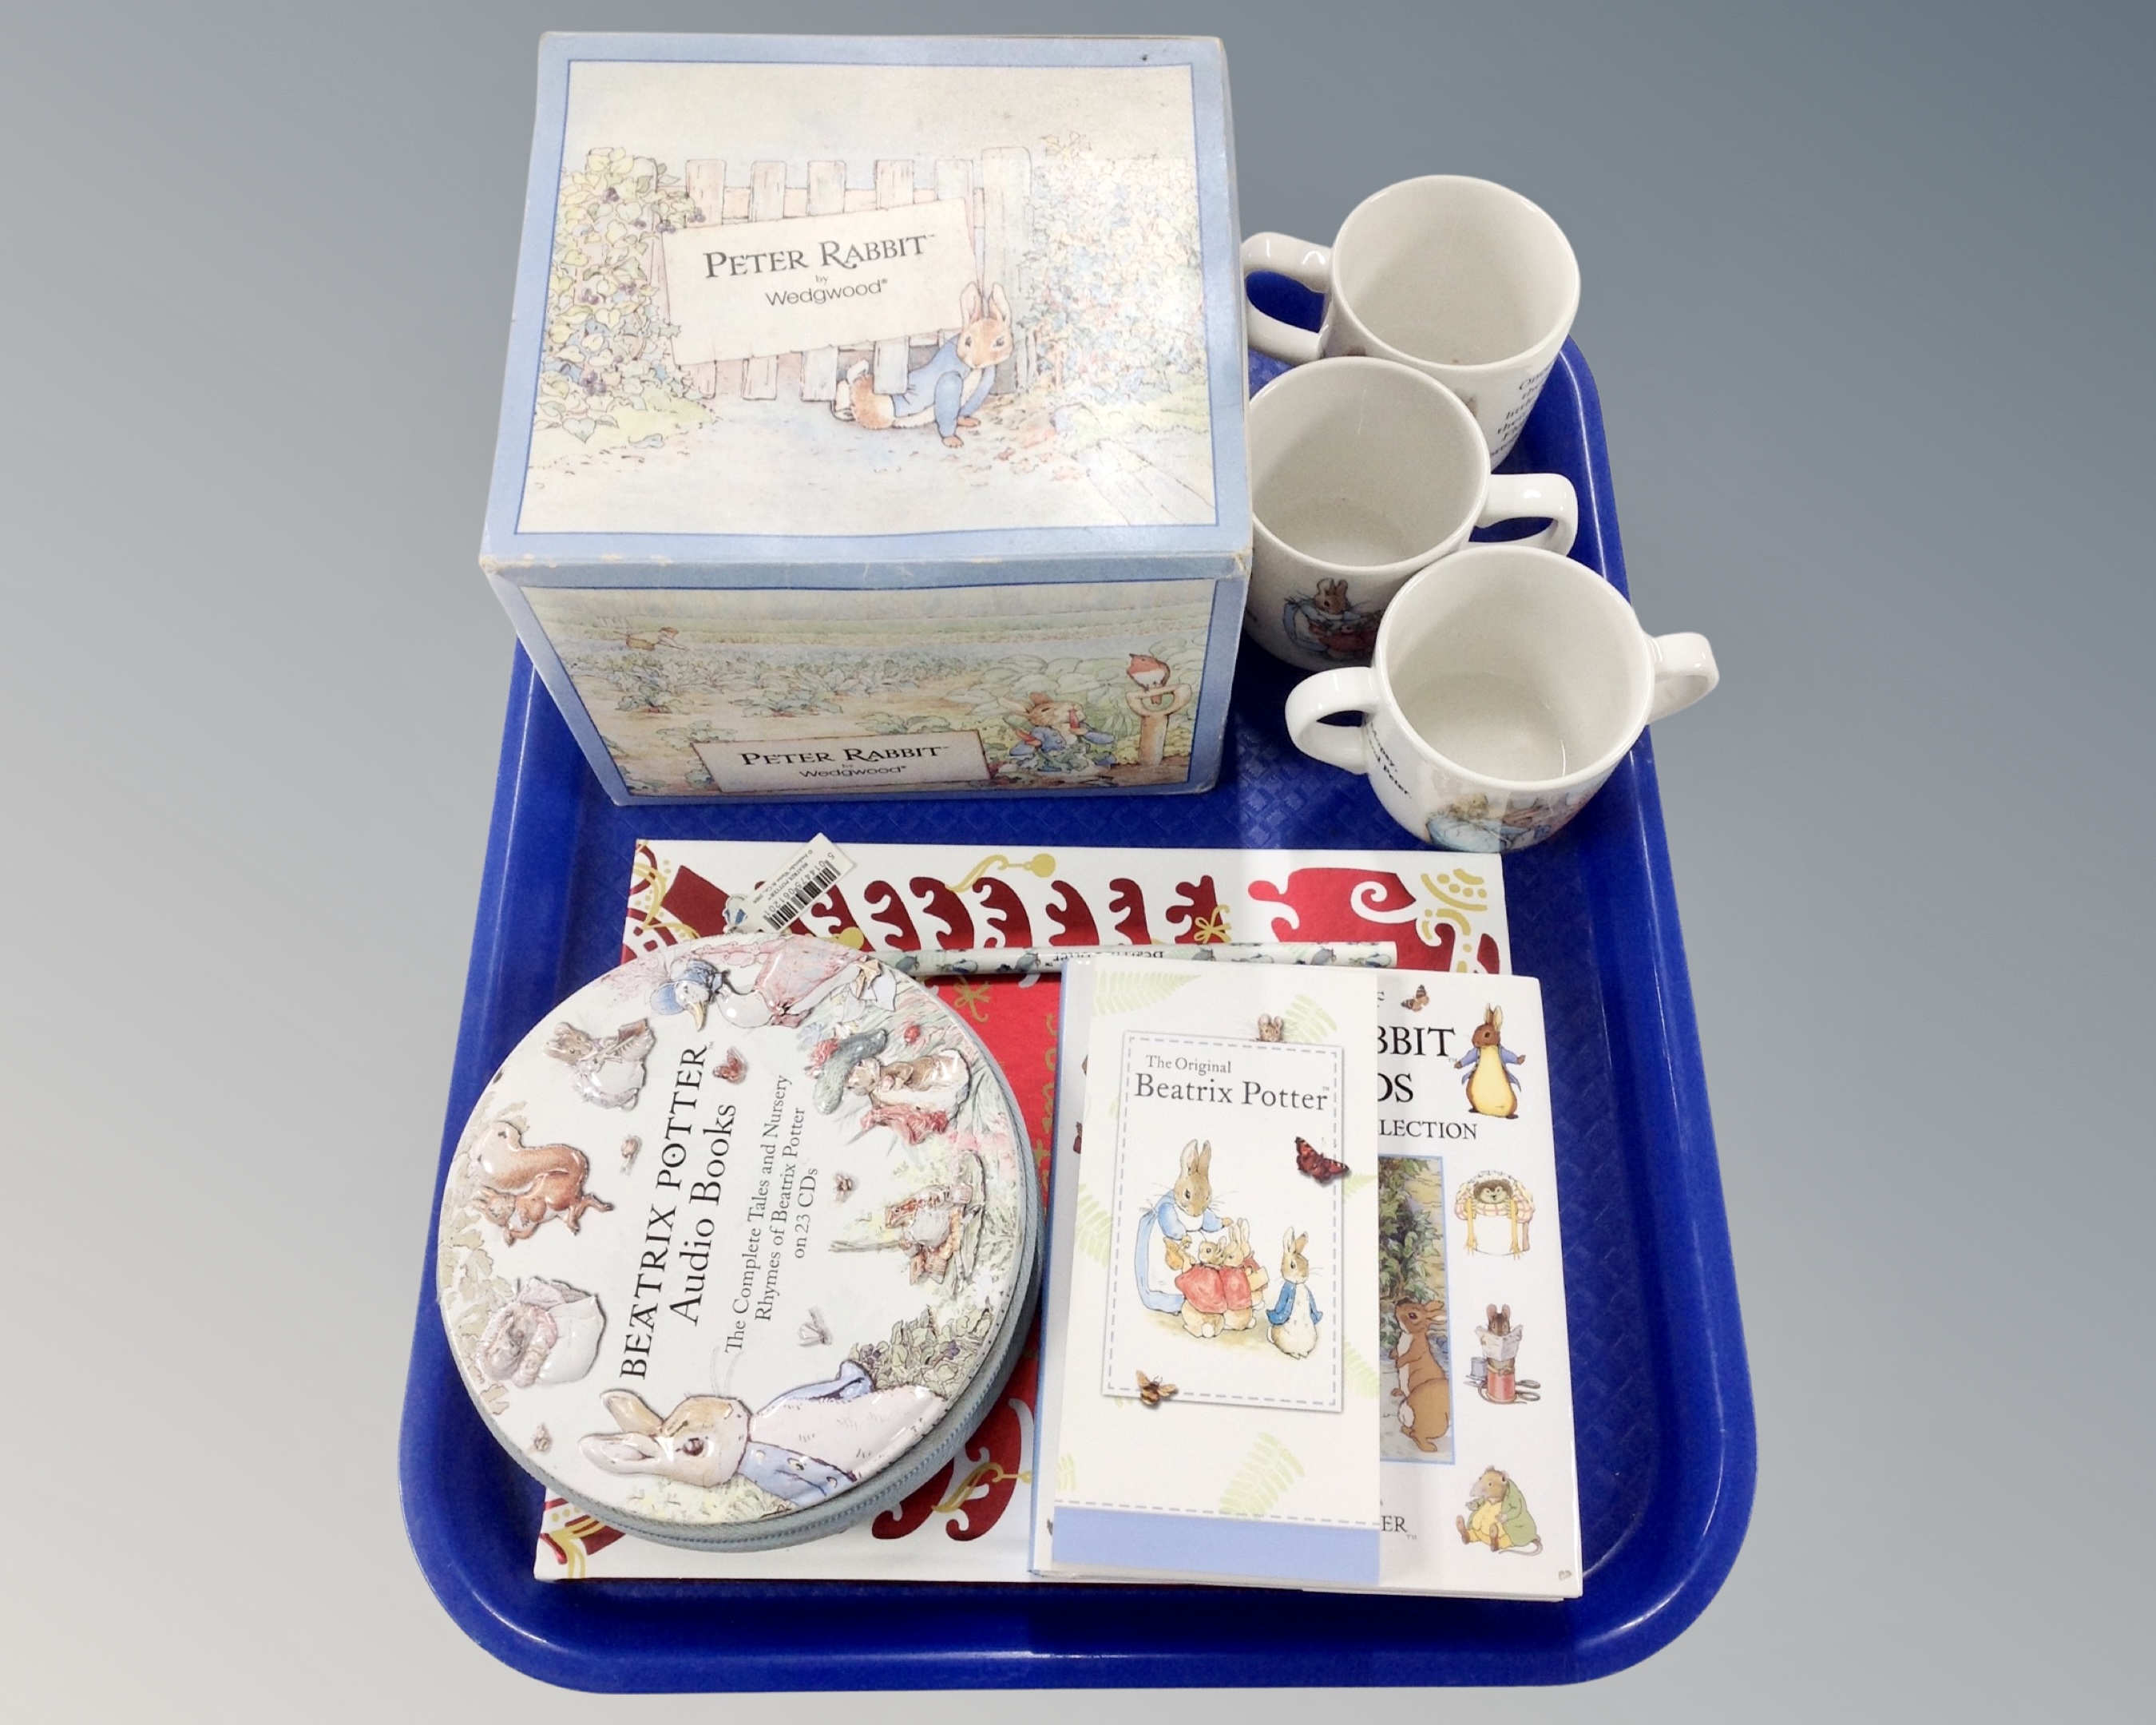 A tray of Wedgwood Peter Rabbit items including three mugs, boxed tea set, story books etc.